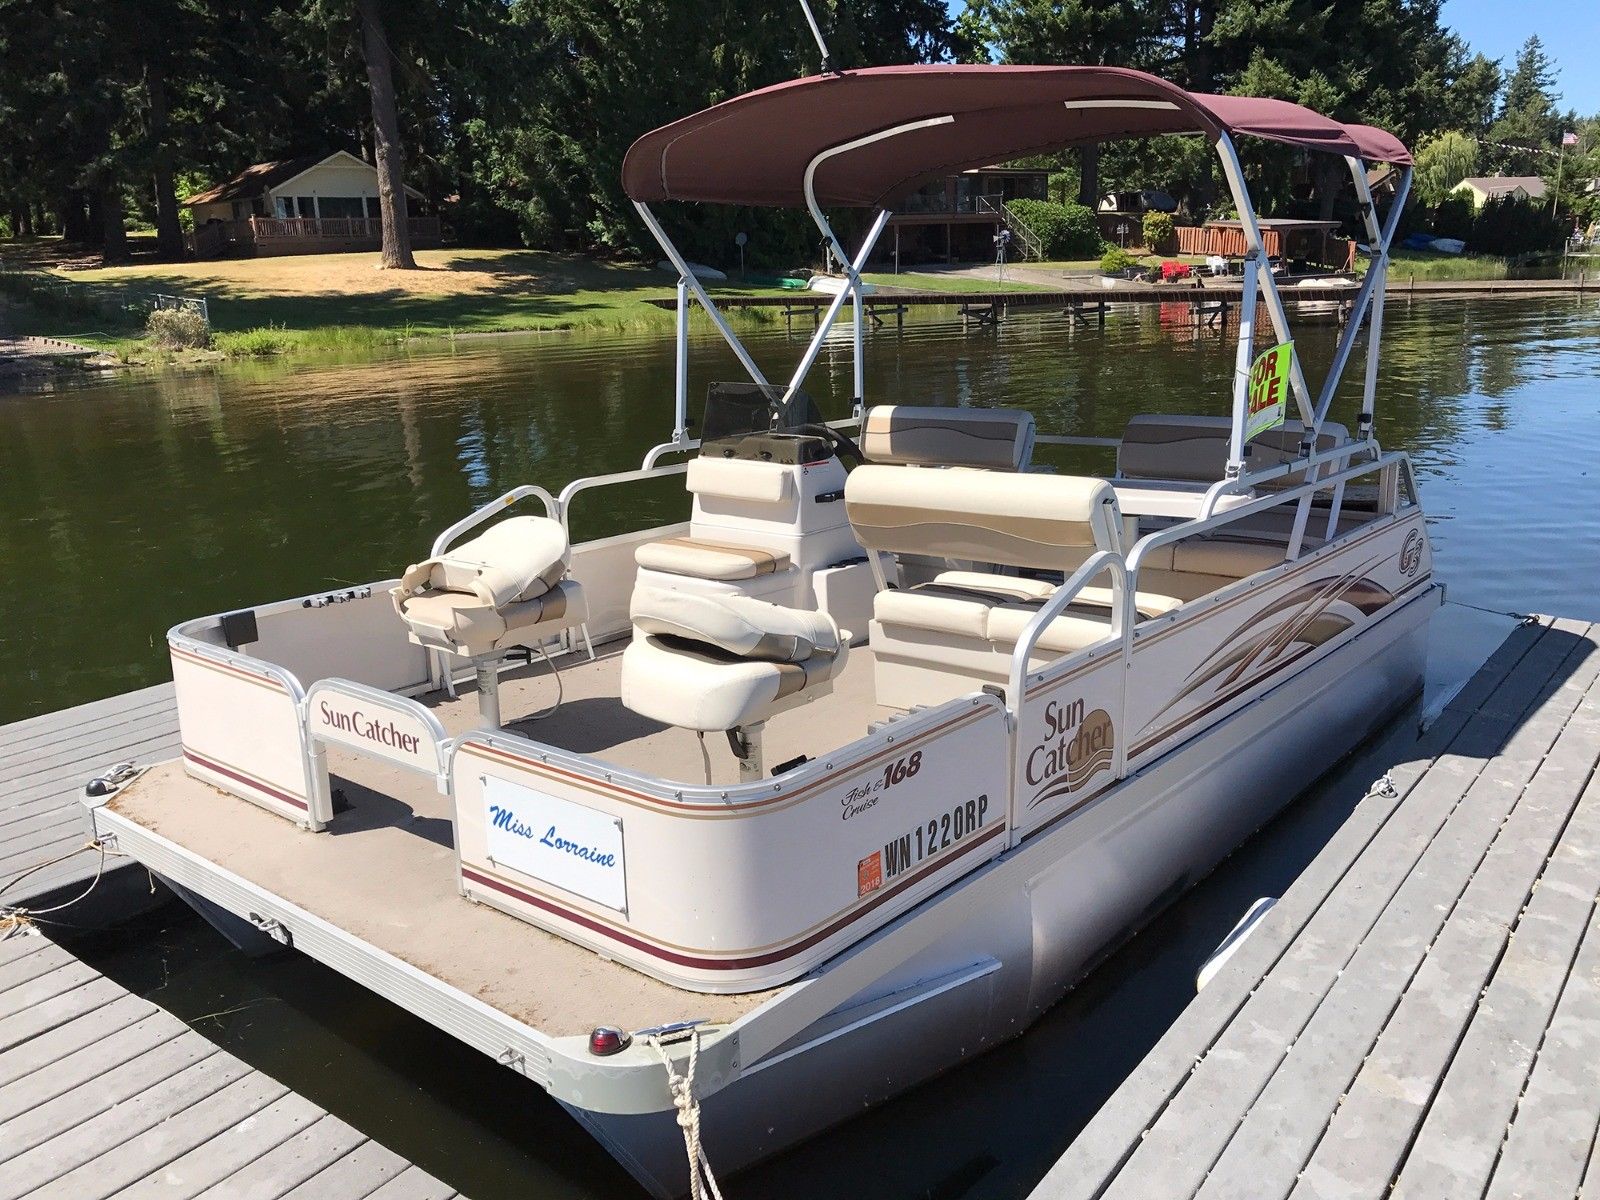 Suncatcher 2010 for sale for $14,975 - Boats-from-USA.com